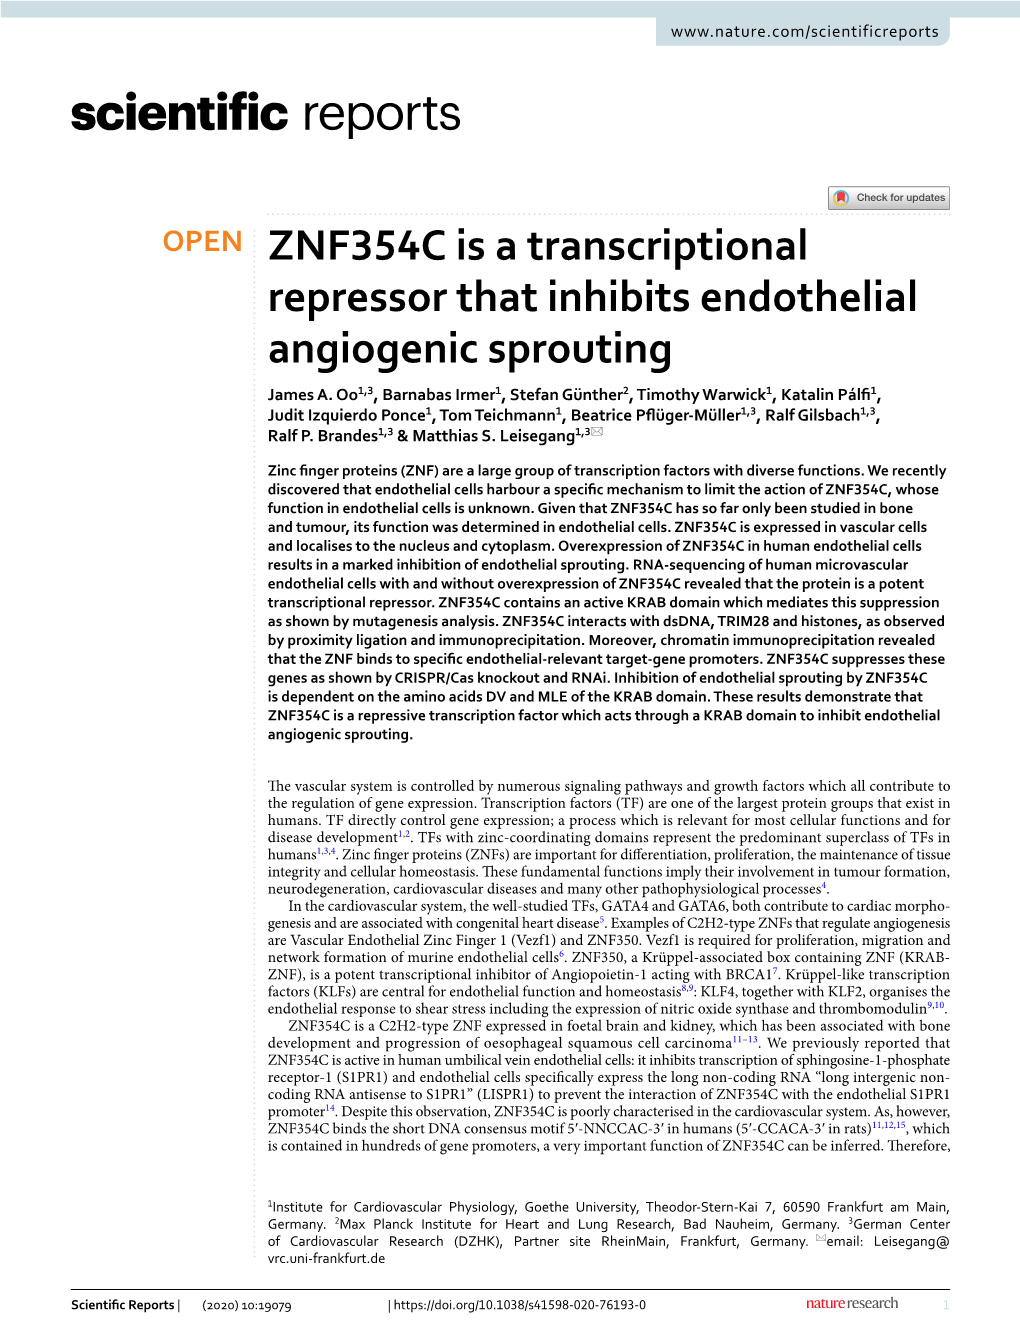 ZNF354C Is a Transcriptional Repressor That Inhibits Endothelial Angiogenic Sprouting James A